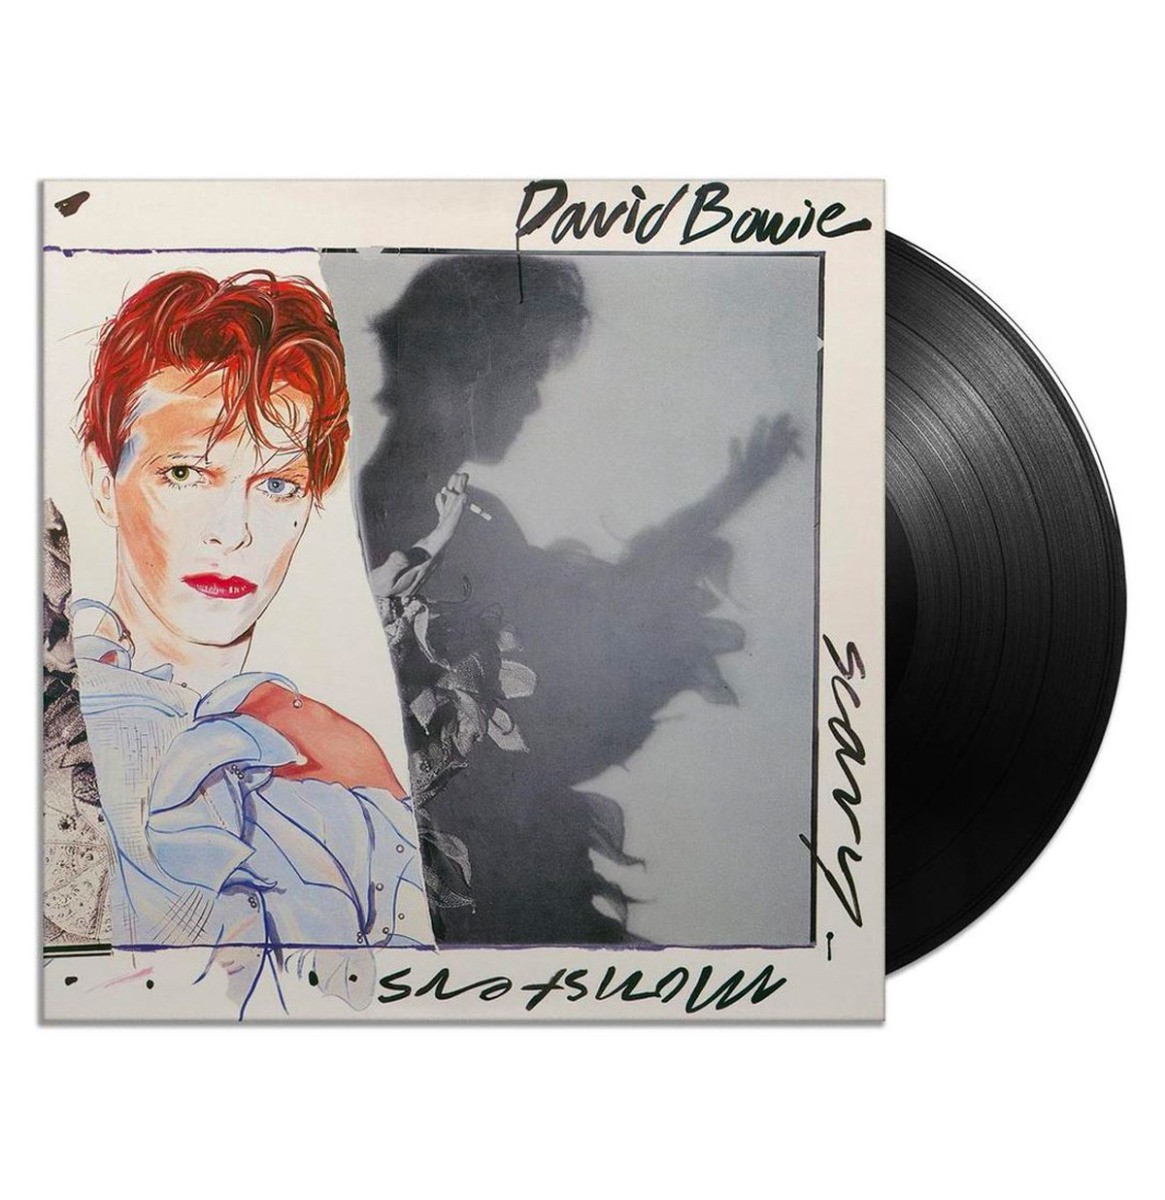 David Bowie - Scary Monsters LP